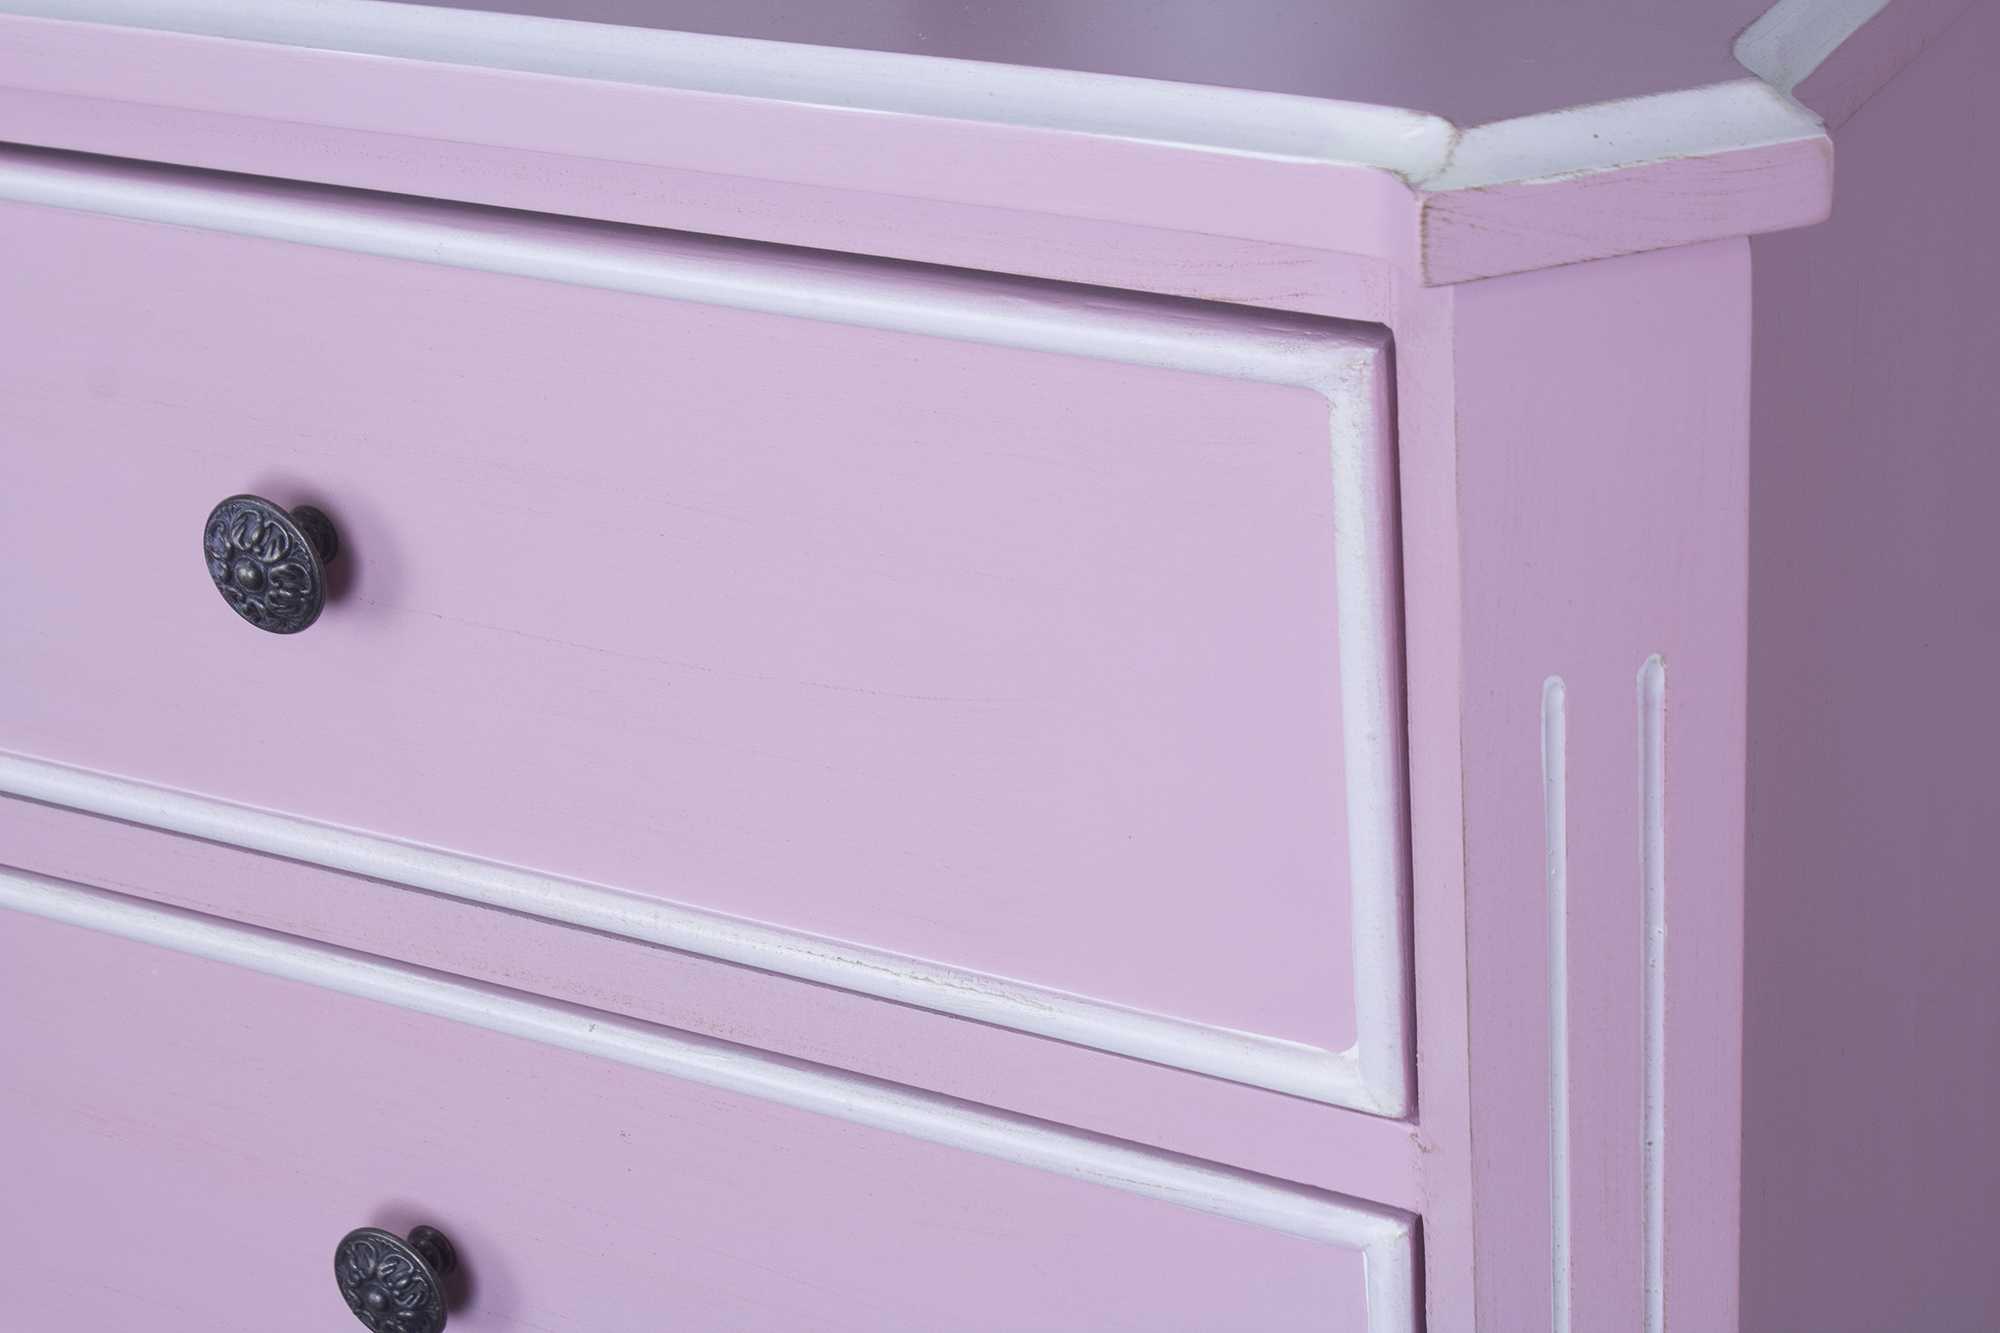 28" X 19.5" X 28" Pink MDF Wood Accent Cabinet with Drawers